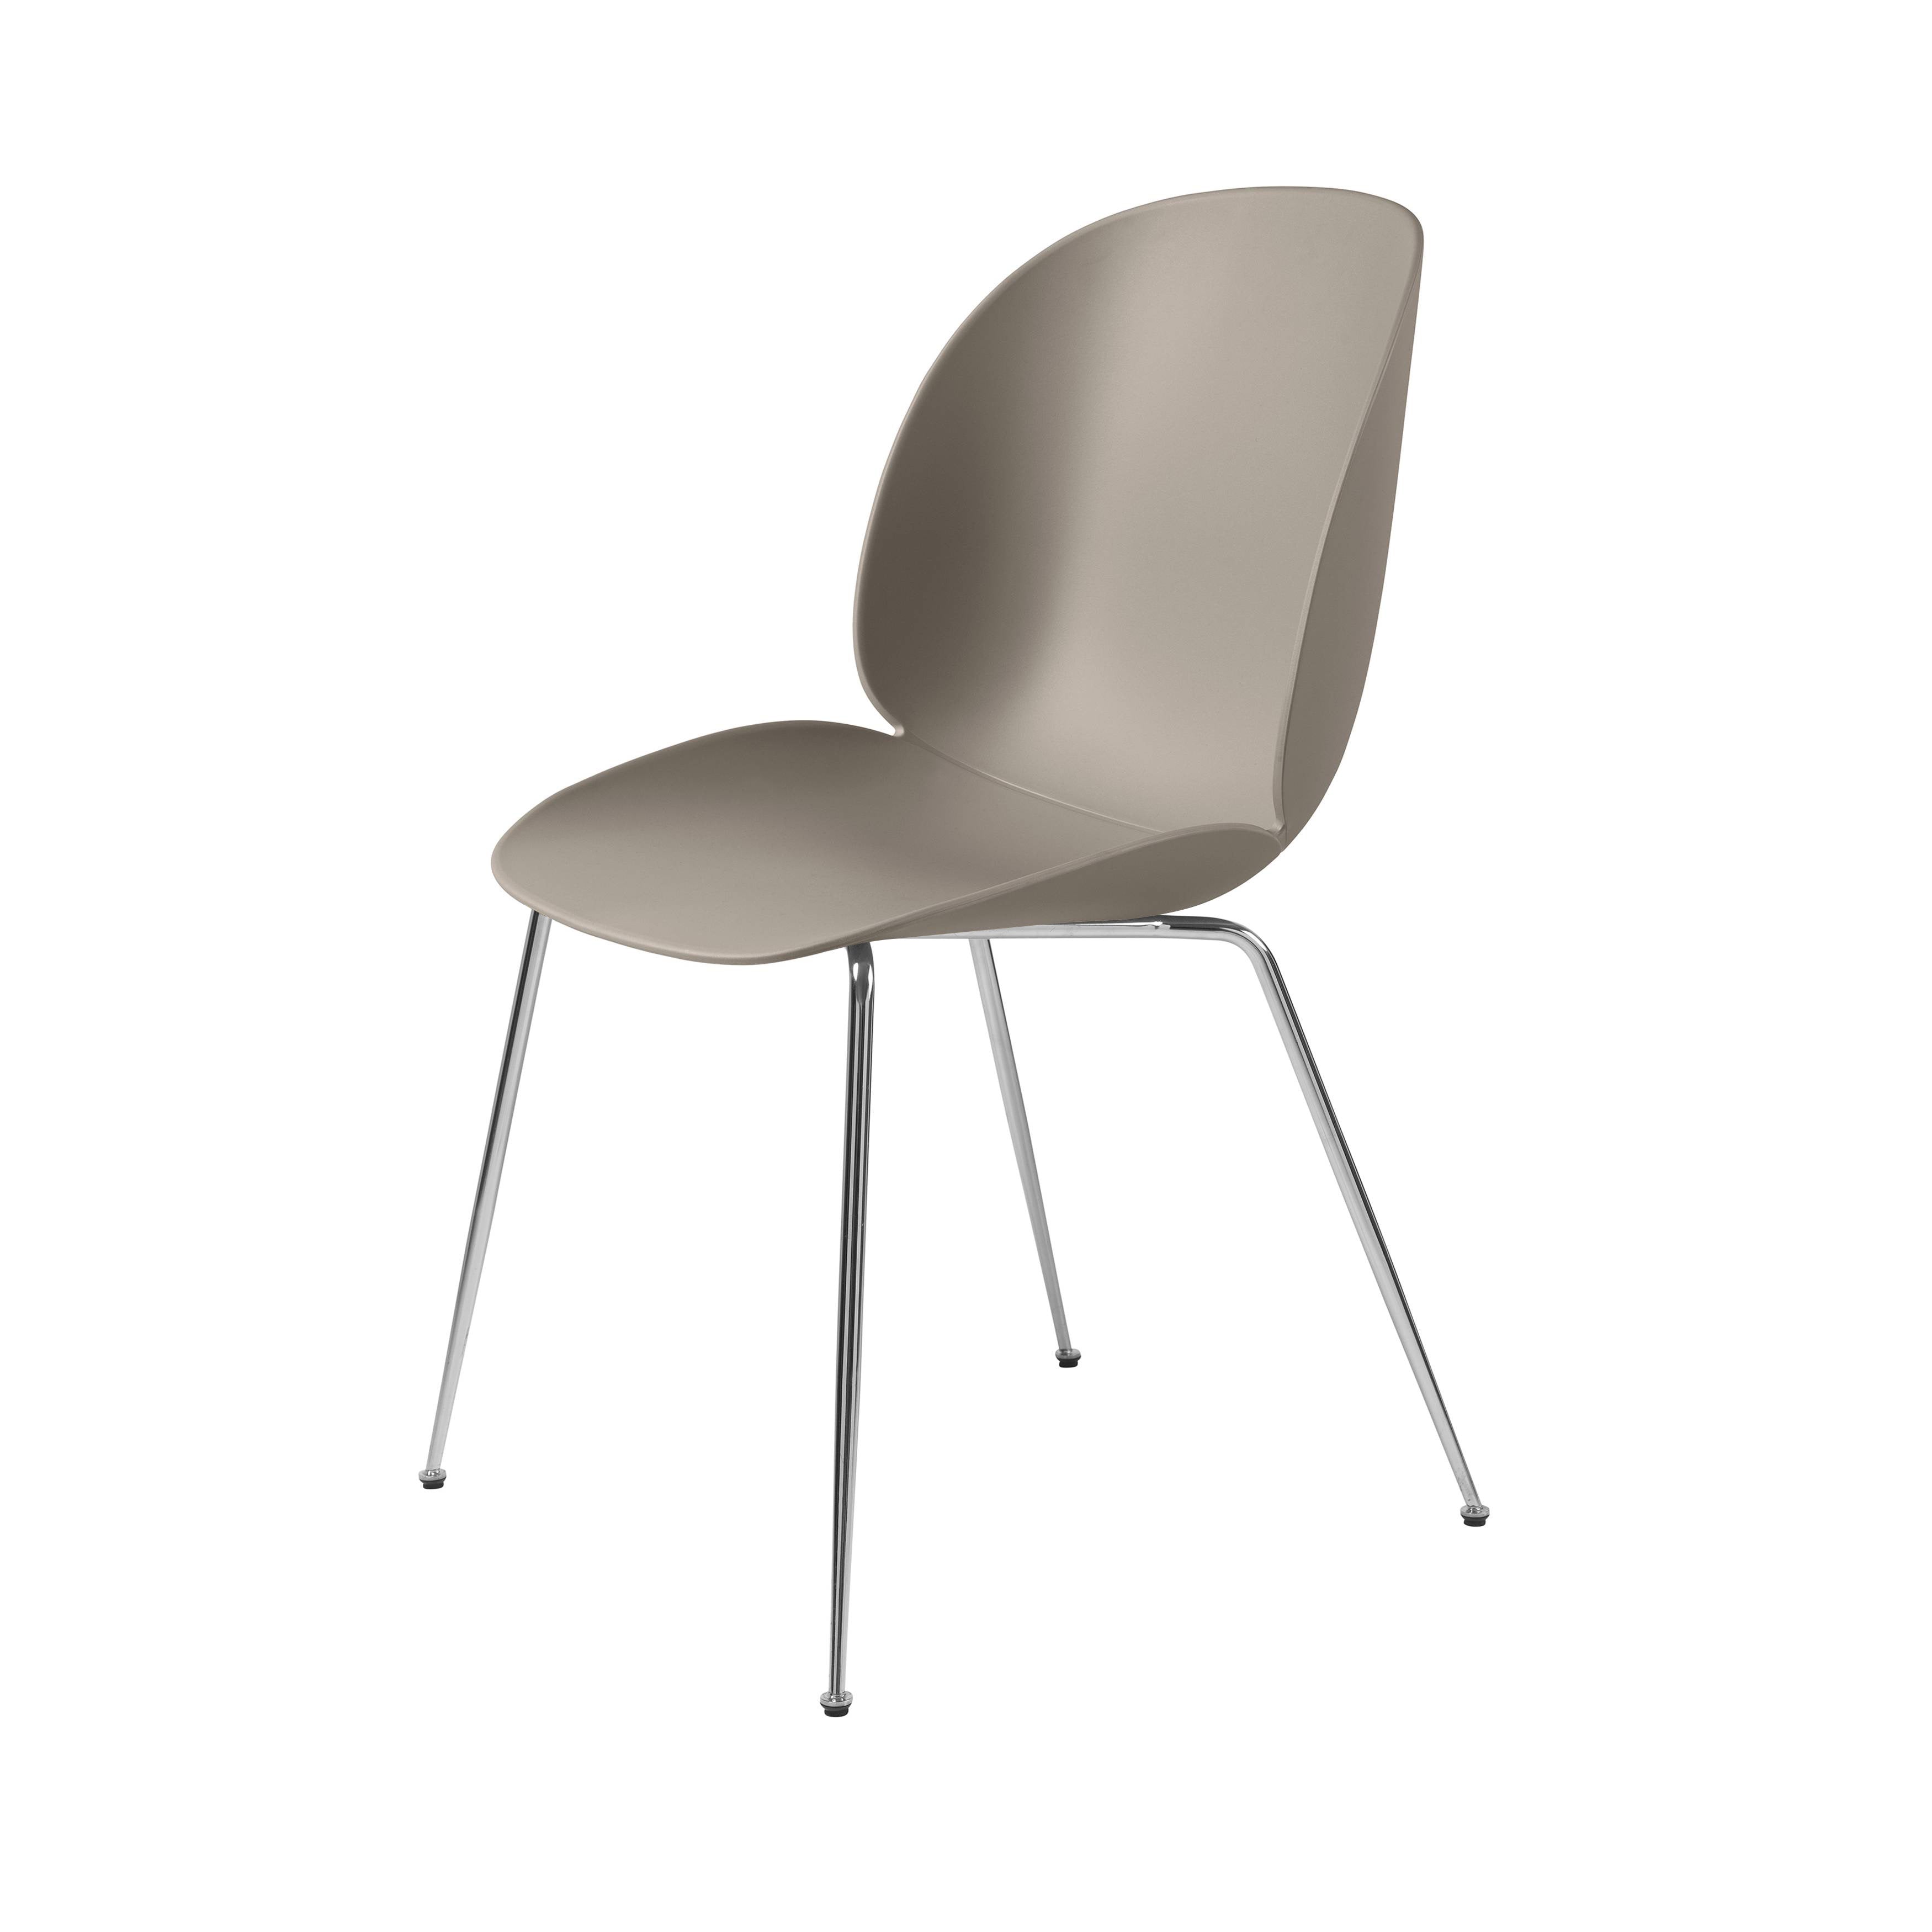 Beetle Dining Chair: Conic Base + New Beige + Chrome + Felt Glides